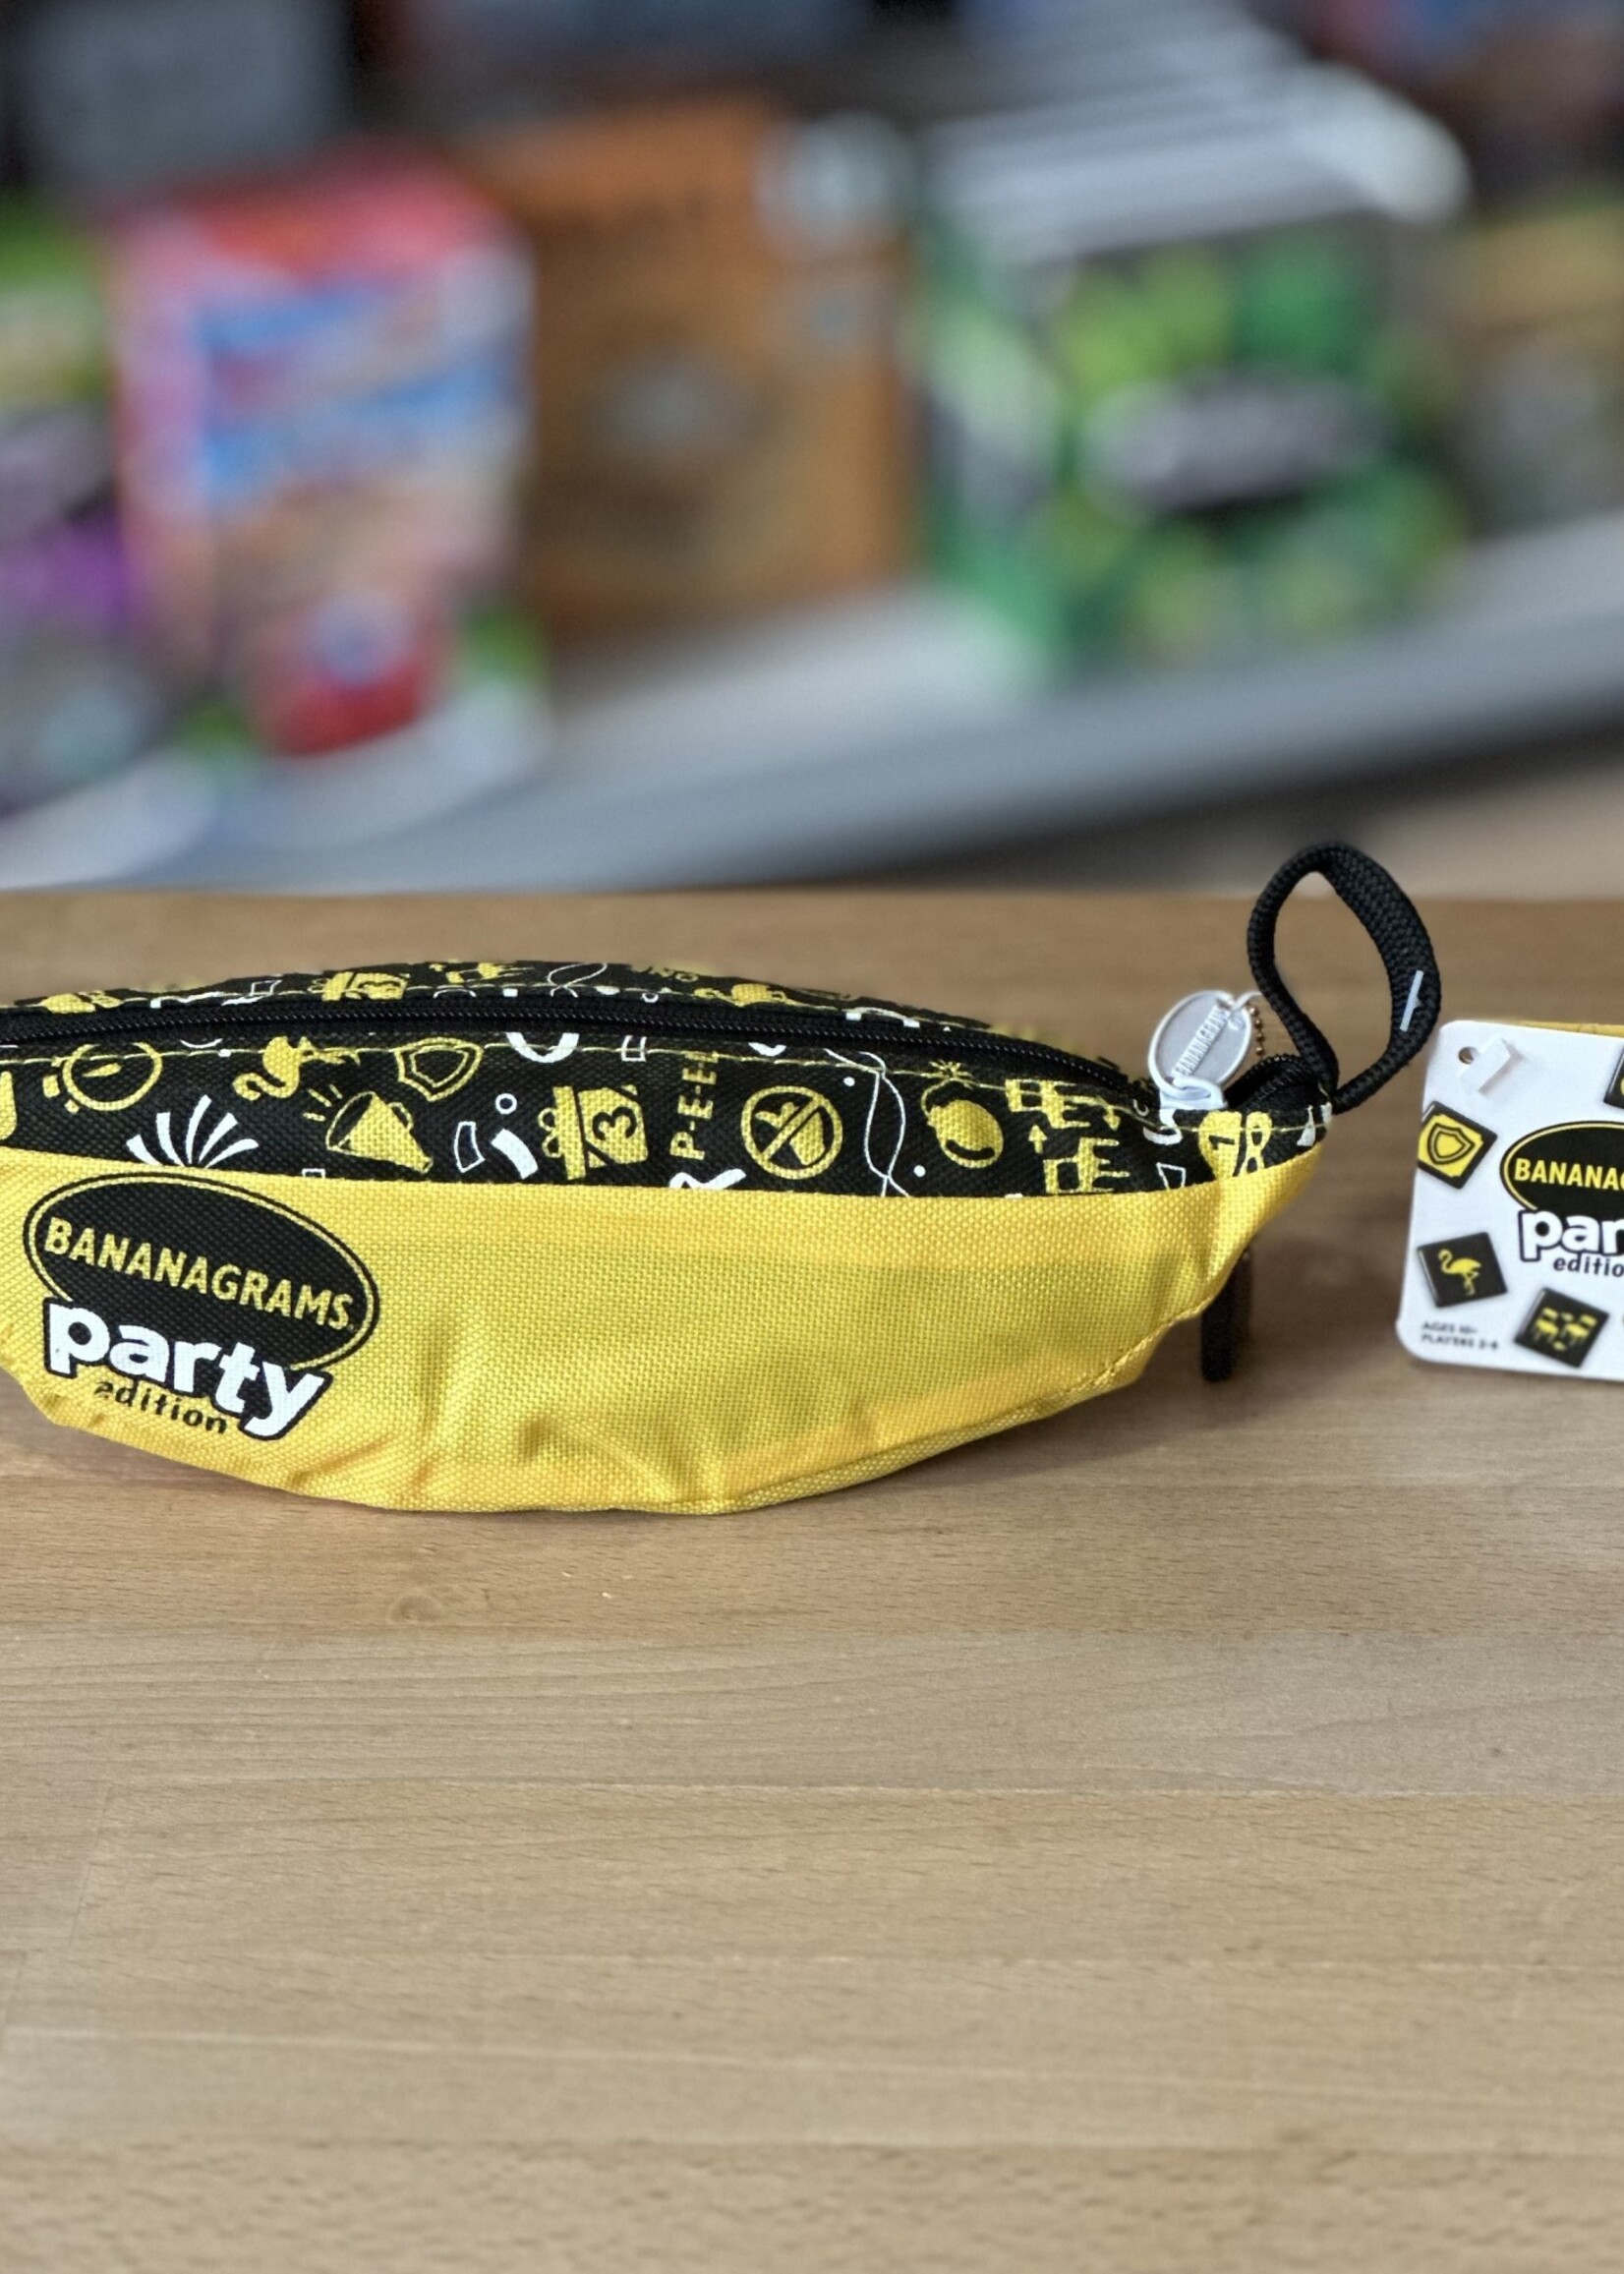 Game - Bananagrams  - Party Edition